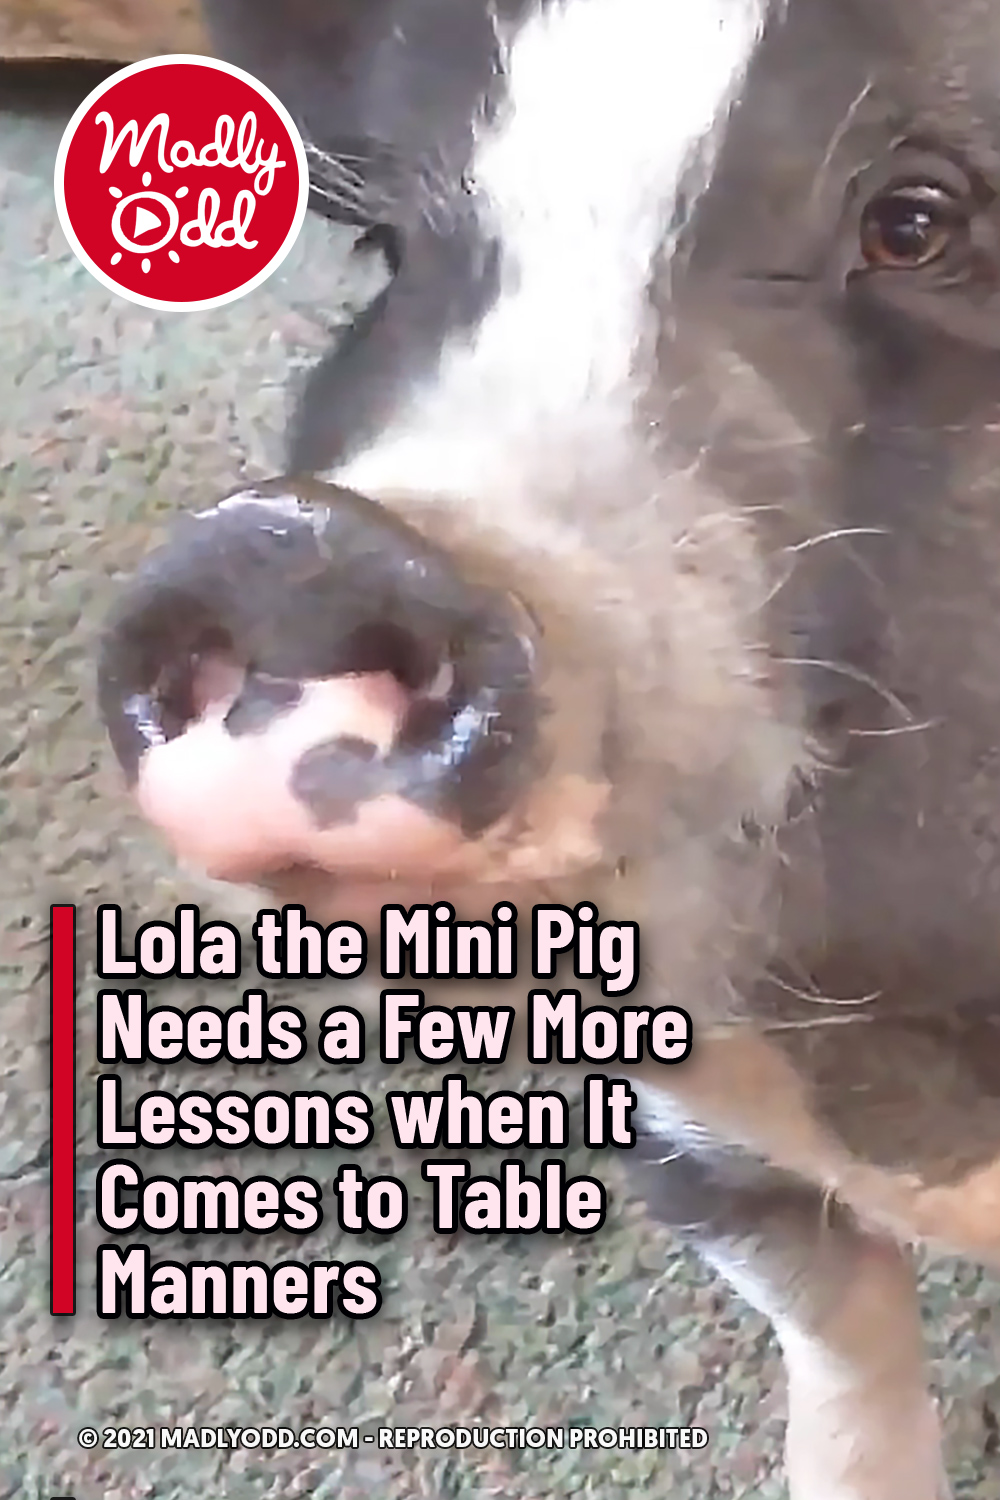 Lola the Mini Pig Needs a Few More Lessons when It Comes to Table Manners